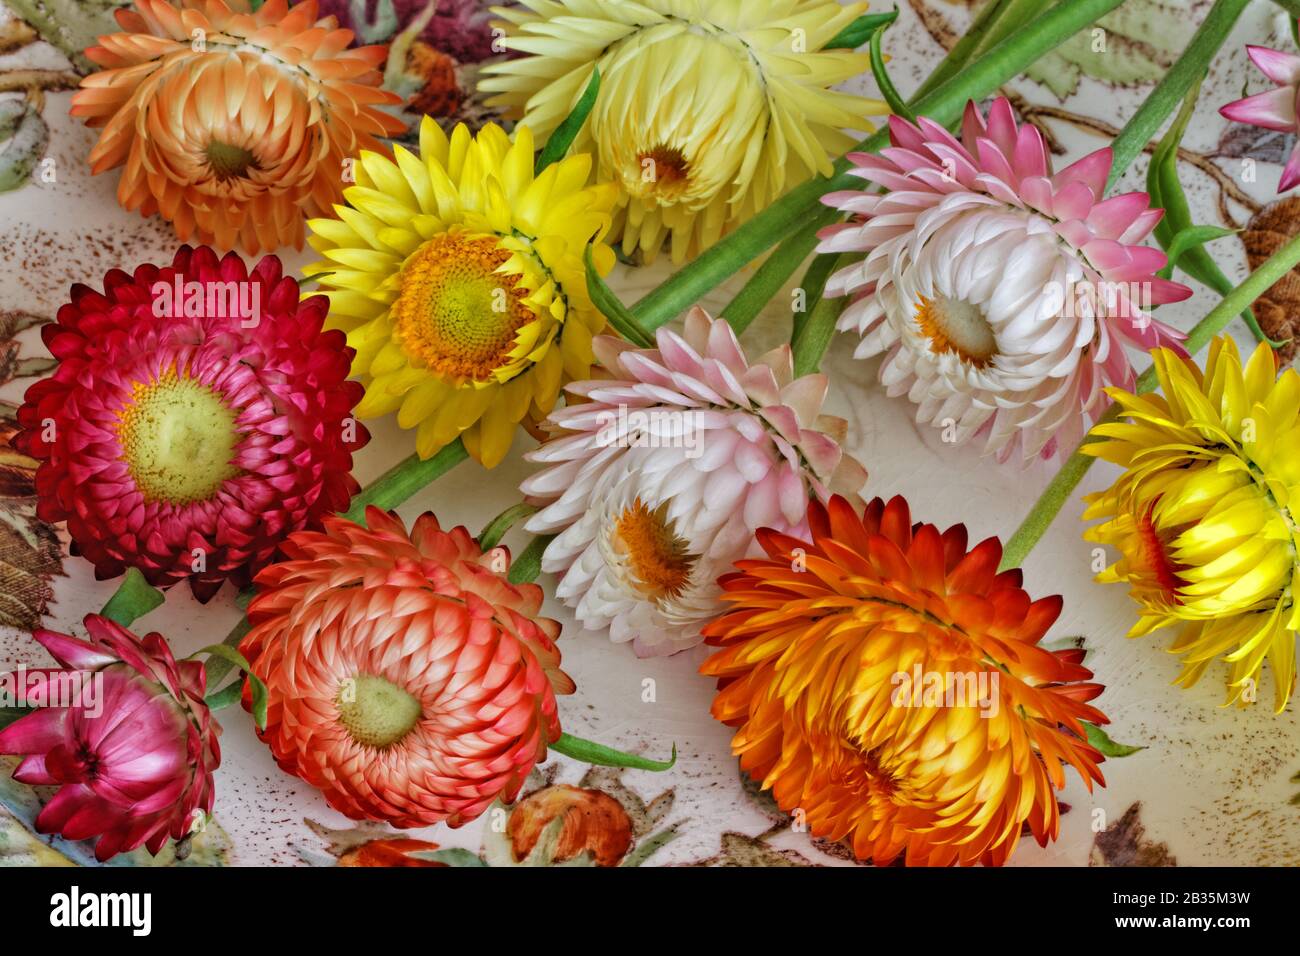 Colourful Straw Flowers Arrangement: selection of various strawflowers with different colours and forms Stock Photo